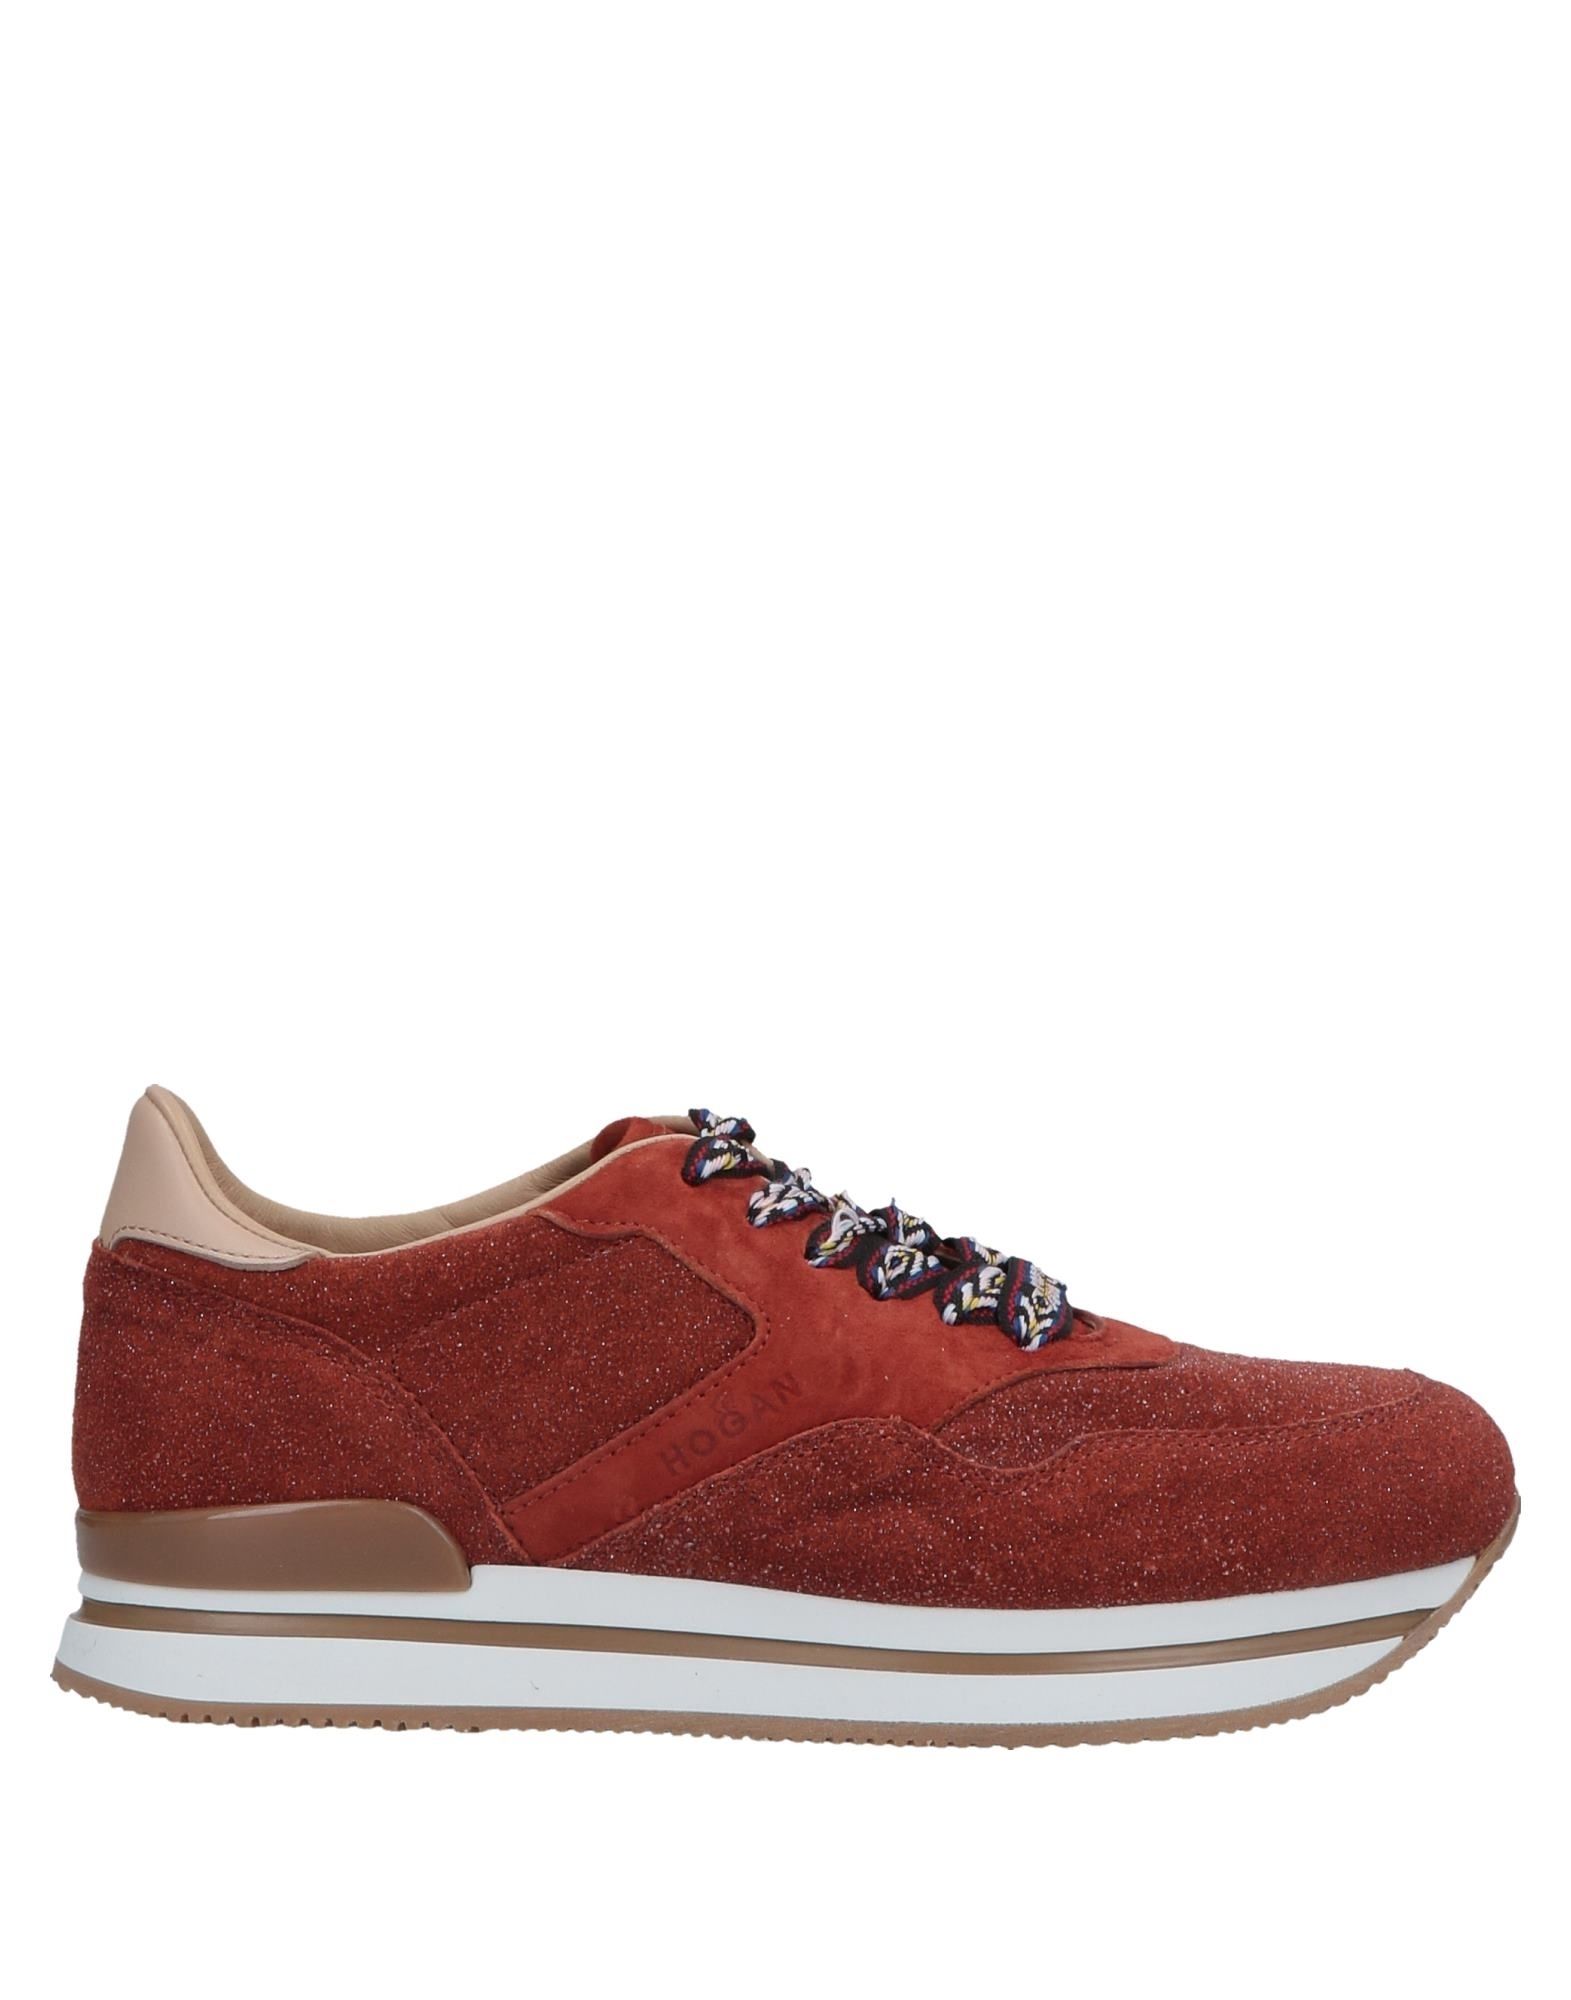 Shop Hogan Woman Sneakers Rust Size 7.5 Soft Leather In Red